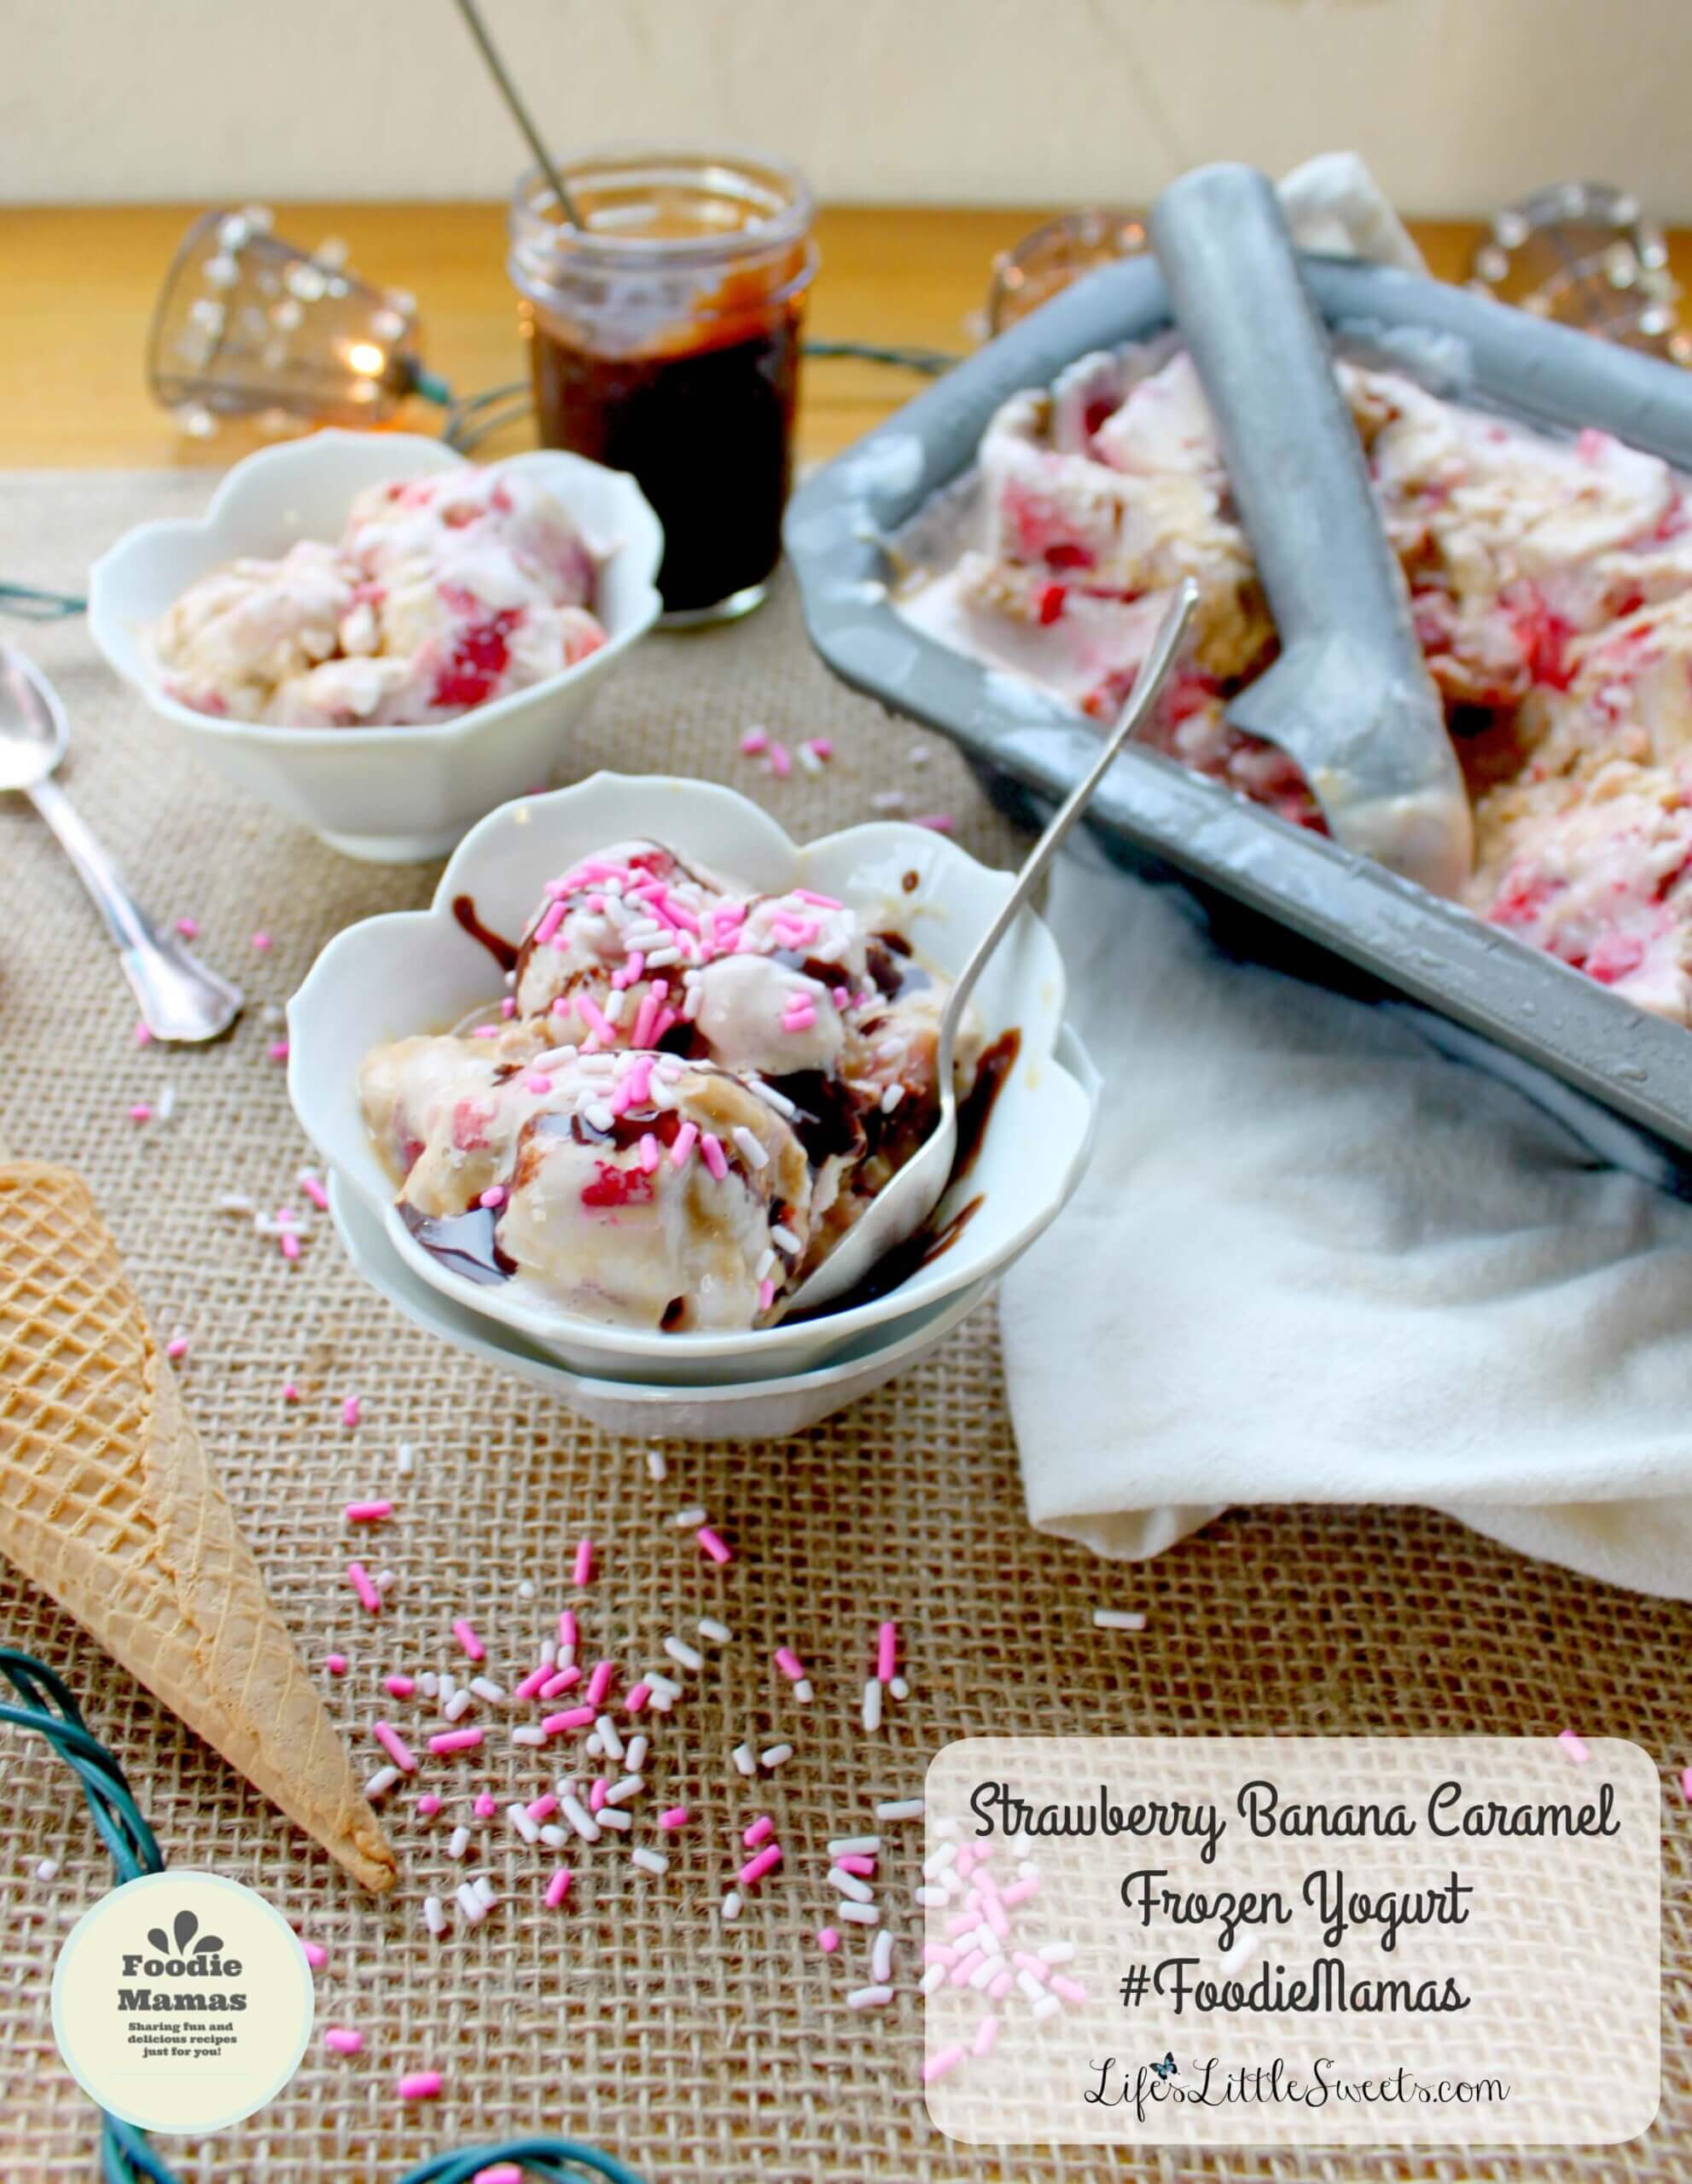 Strawberry Banana Caramel Frozen Yogurt has only 4 ingredients, uses a base of frozen bananas & strawberry Greek yogurt with fresh diced strawberries and a ribbon of my Easy Caramel (Dulce de Leche) recipe and here's a bonus: it does not require the use of an ice cream maker! #FoodieMamas #frozenyogurt #lifeslittlesweets #strawberries #strawberry